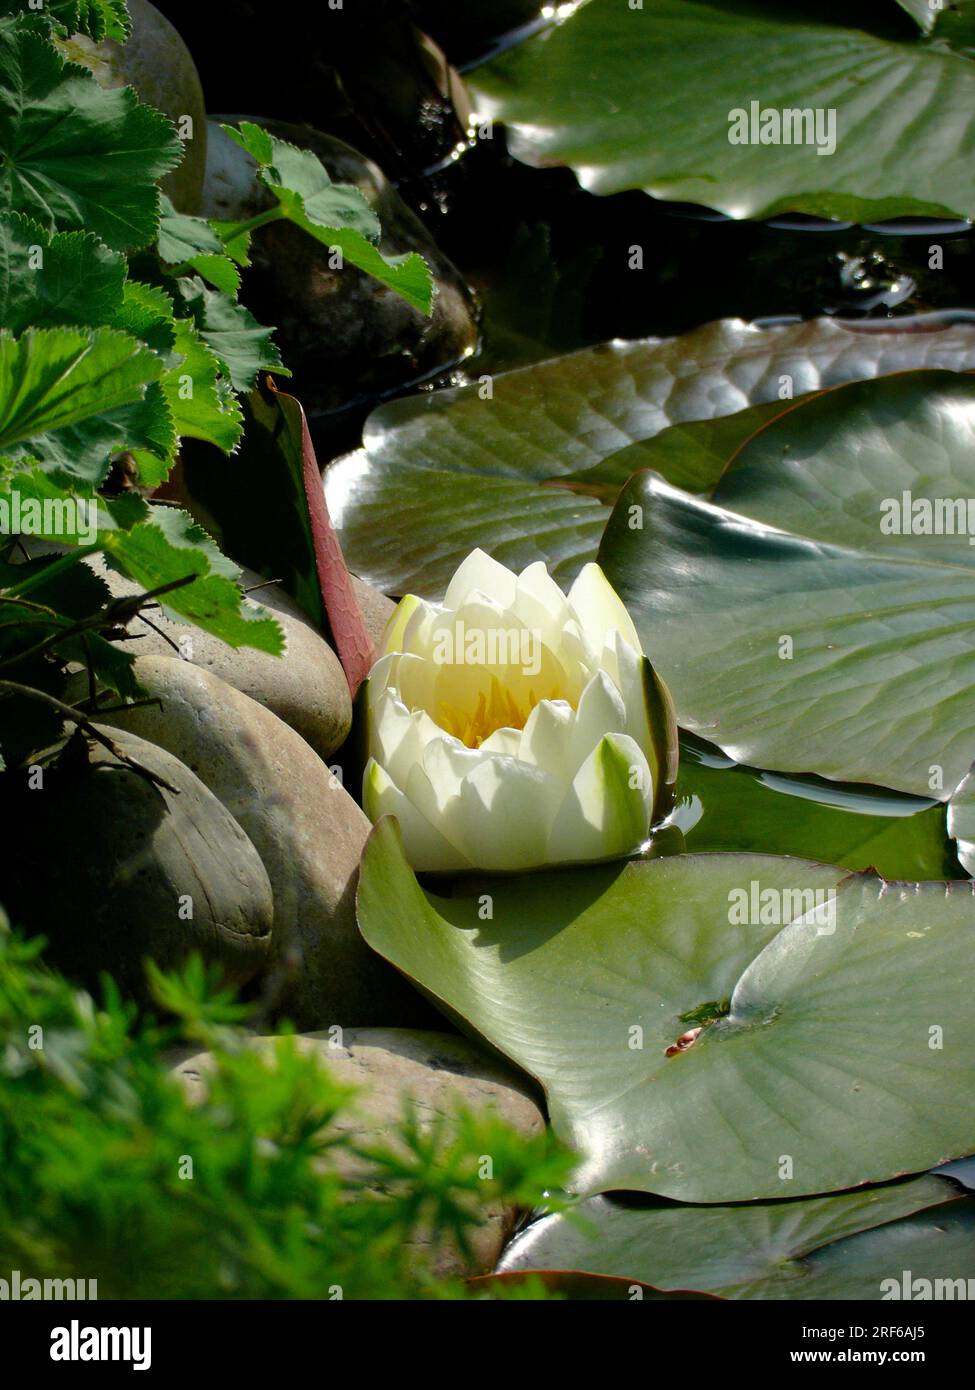 European white water lily (Nymphaea alba) in the garden pond, White water lily Stock Photo